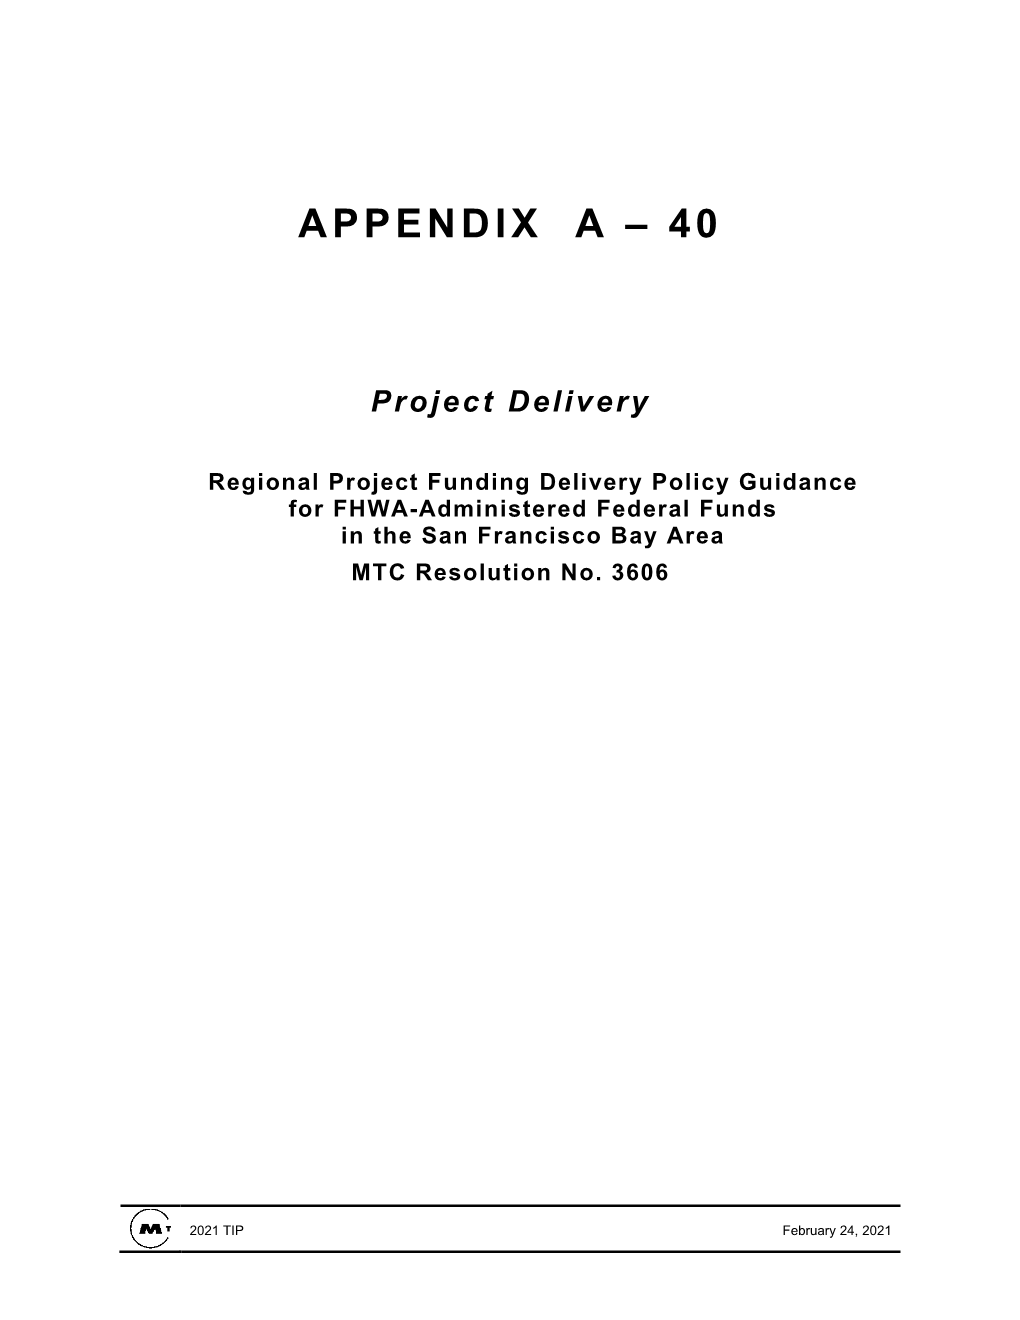 Appendices A-40 Through A-42 Project Delivery